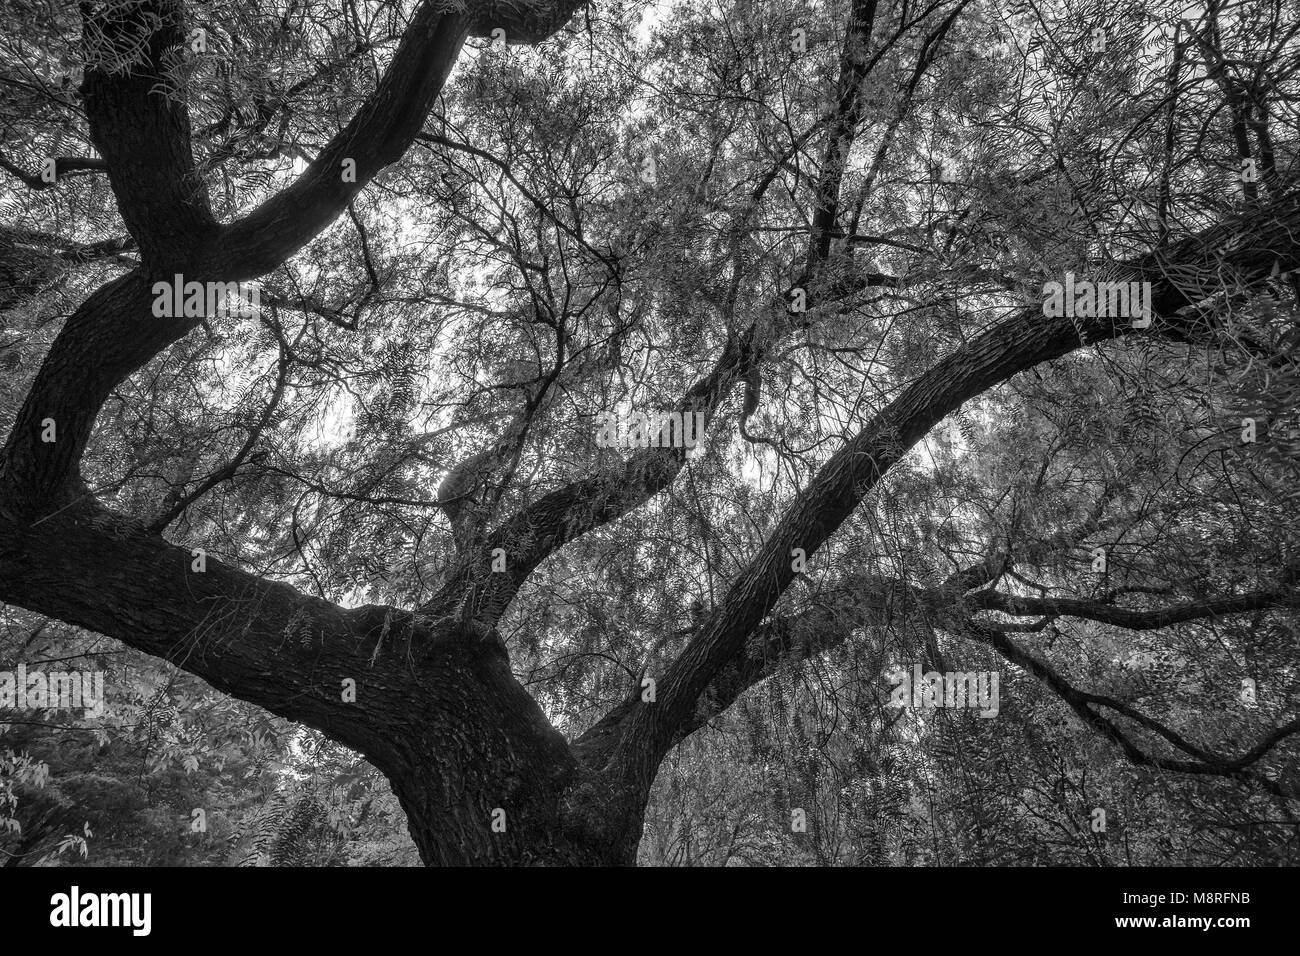 Low Angle View of Tree and Branches Stock Photo